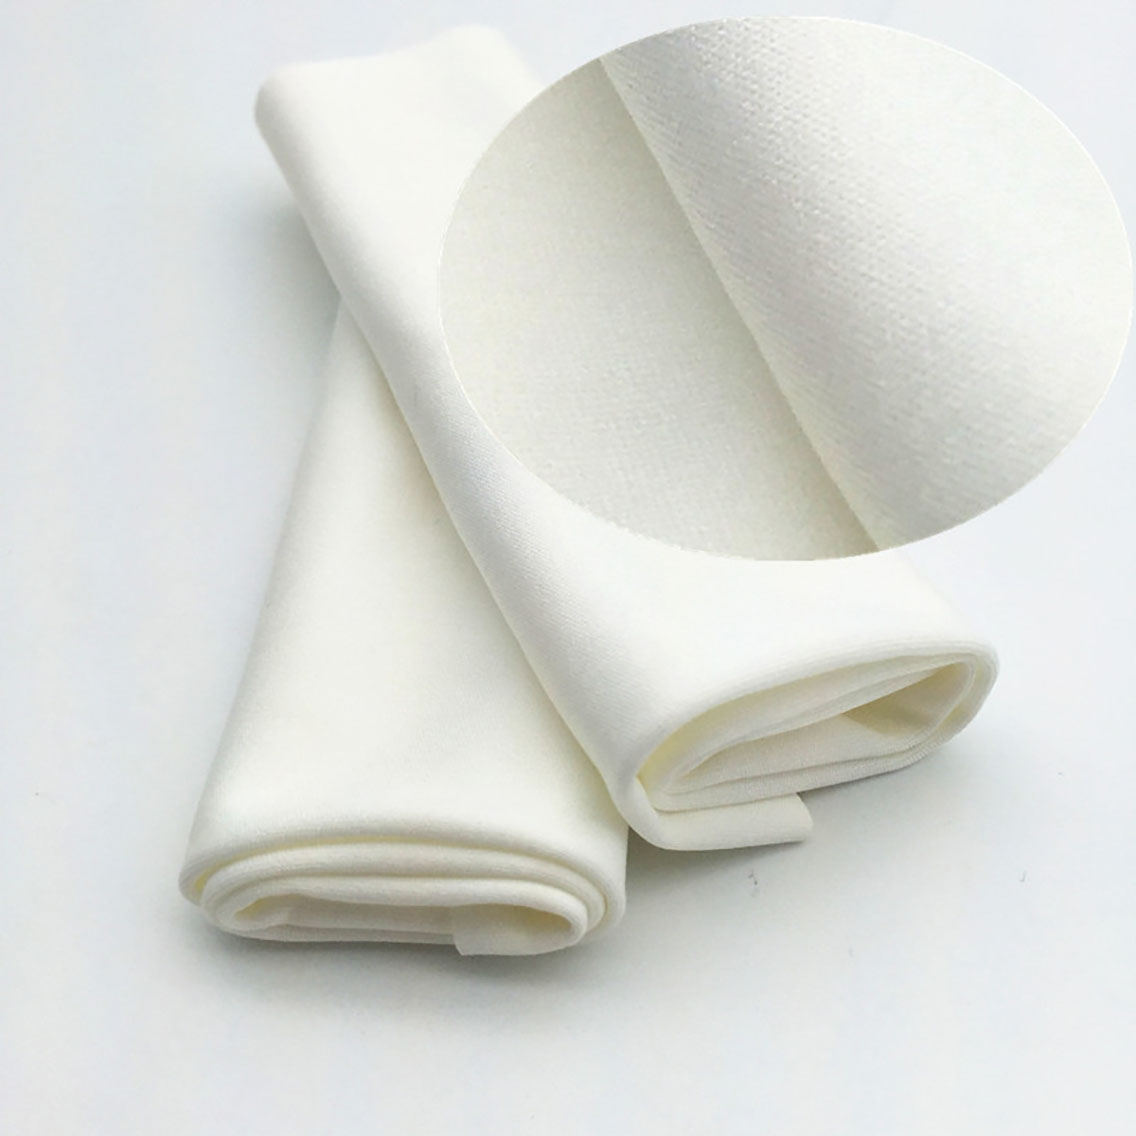 Cleanmo durable lens cloth manufacturer for medical device products-2